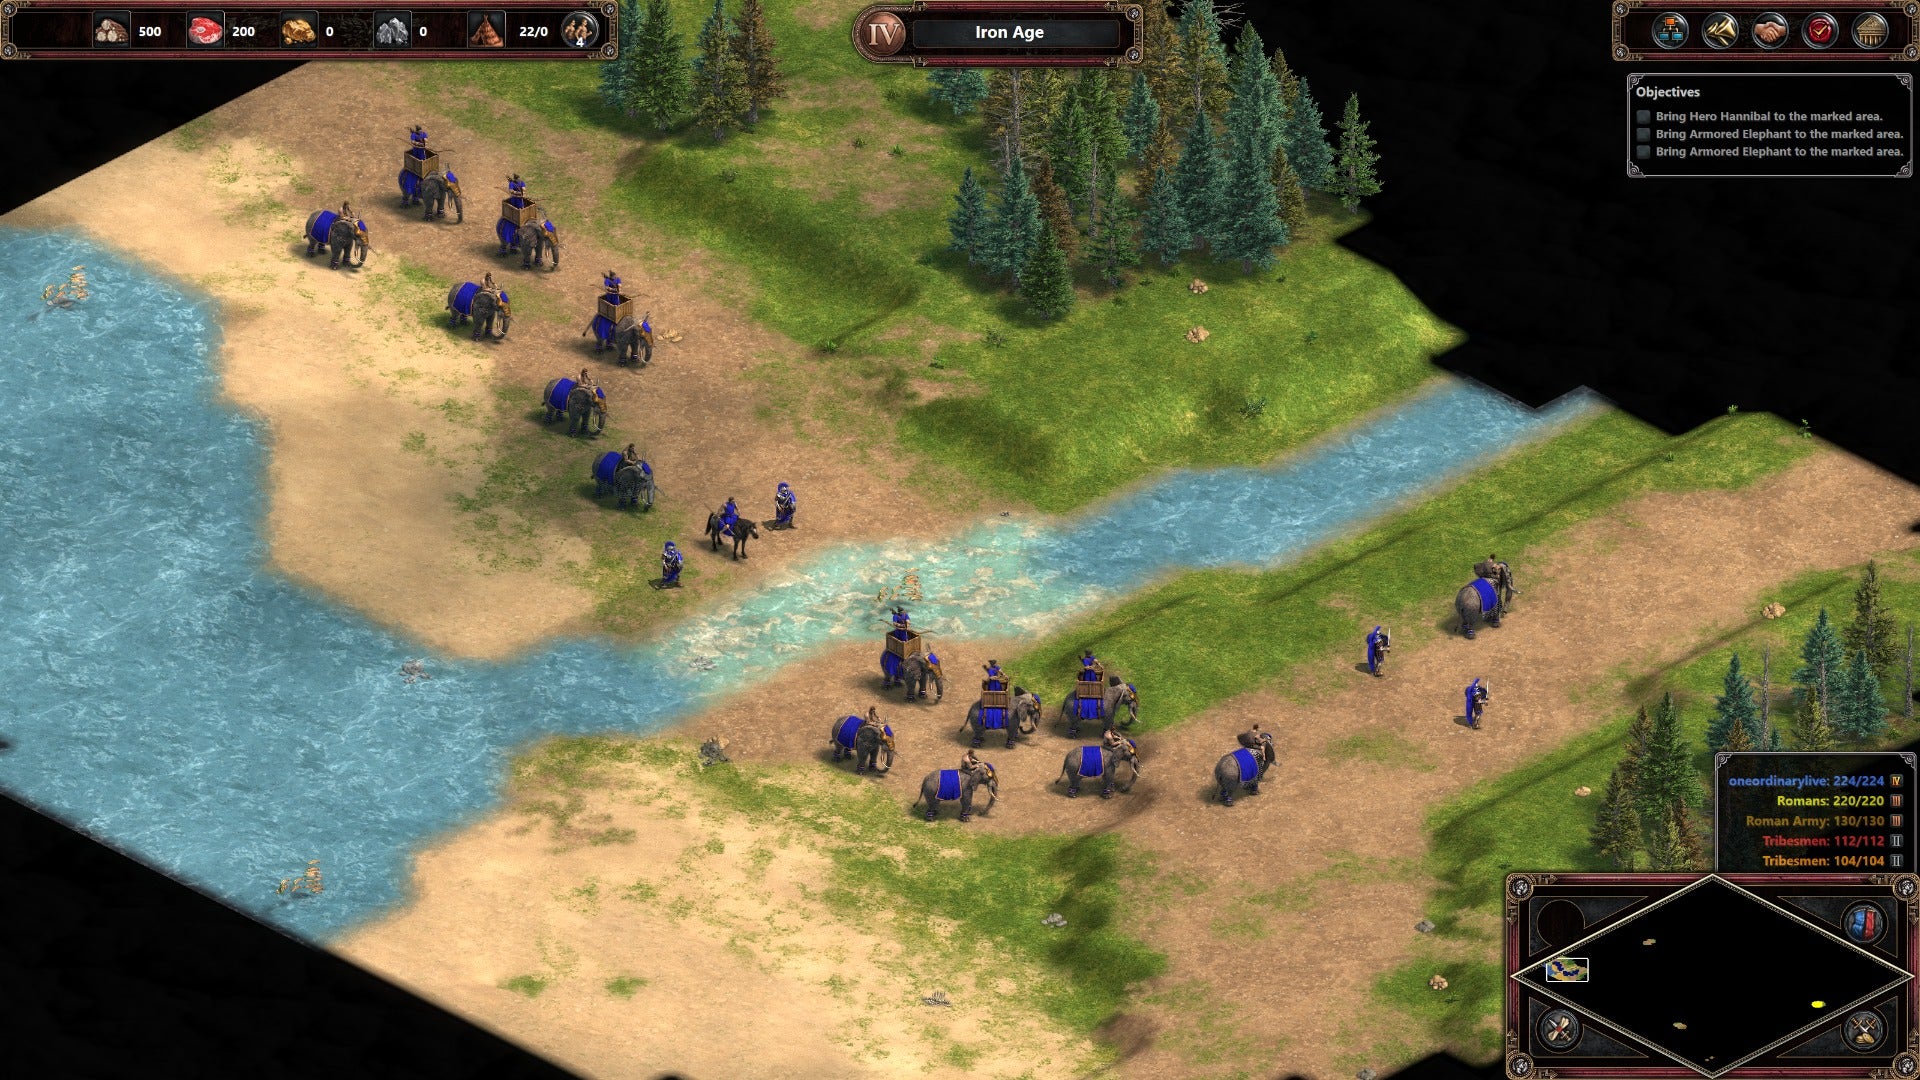 age of empires 2 definitive edition existing civ changes